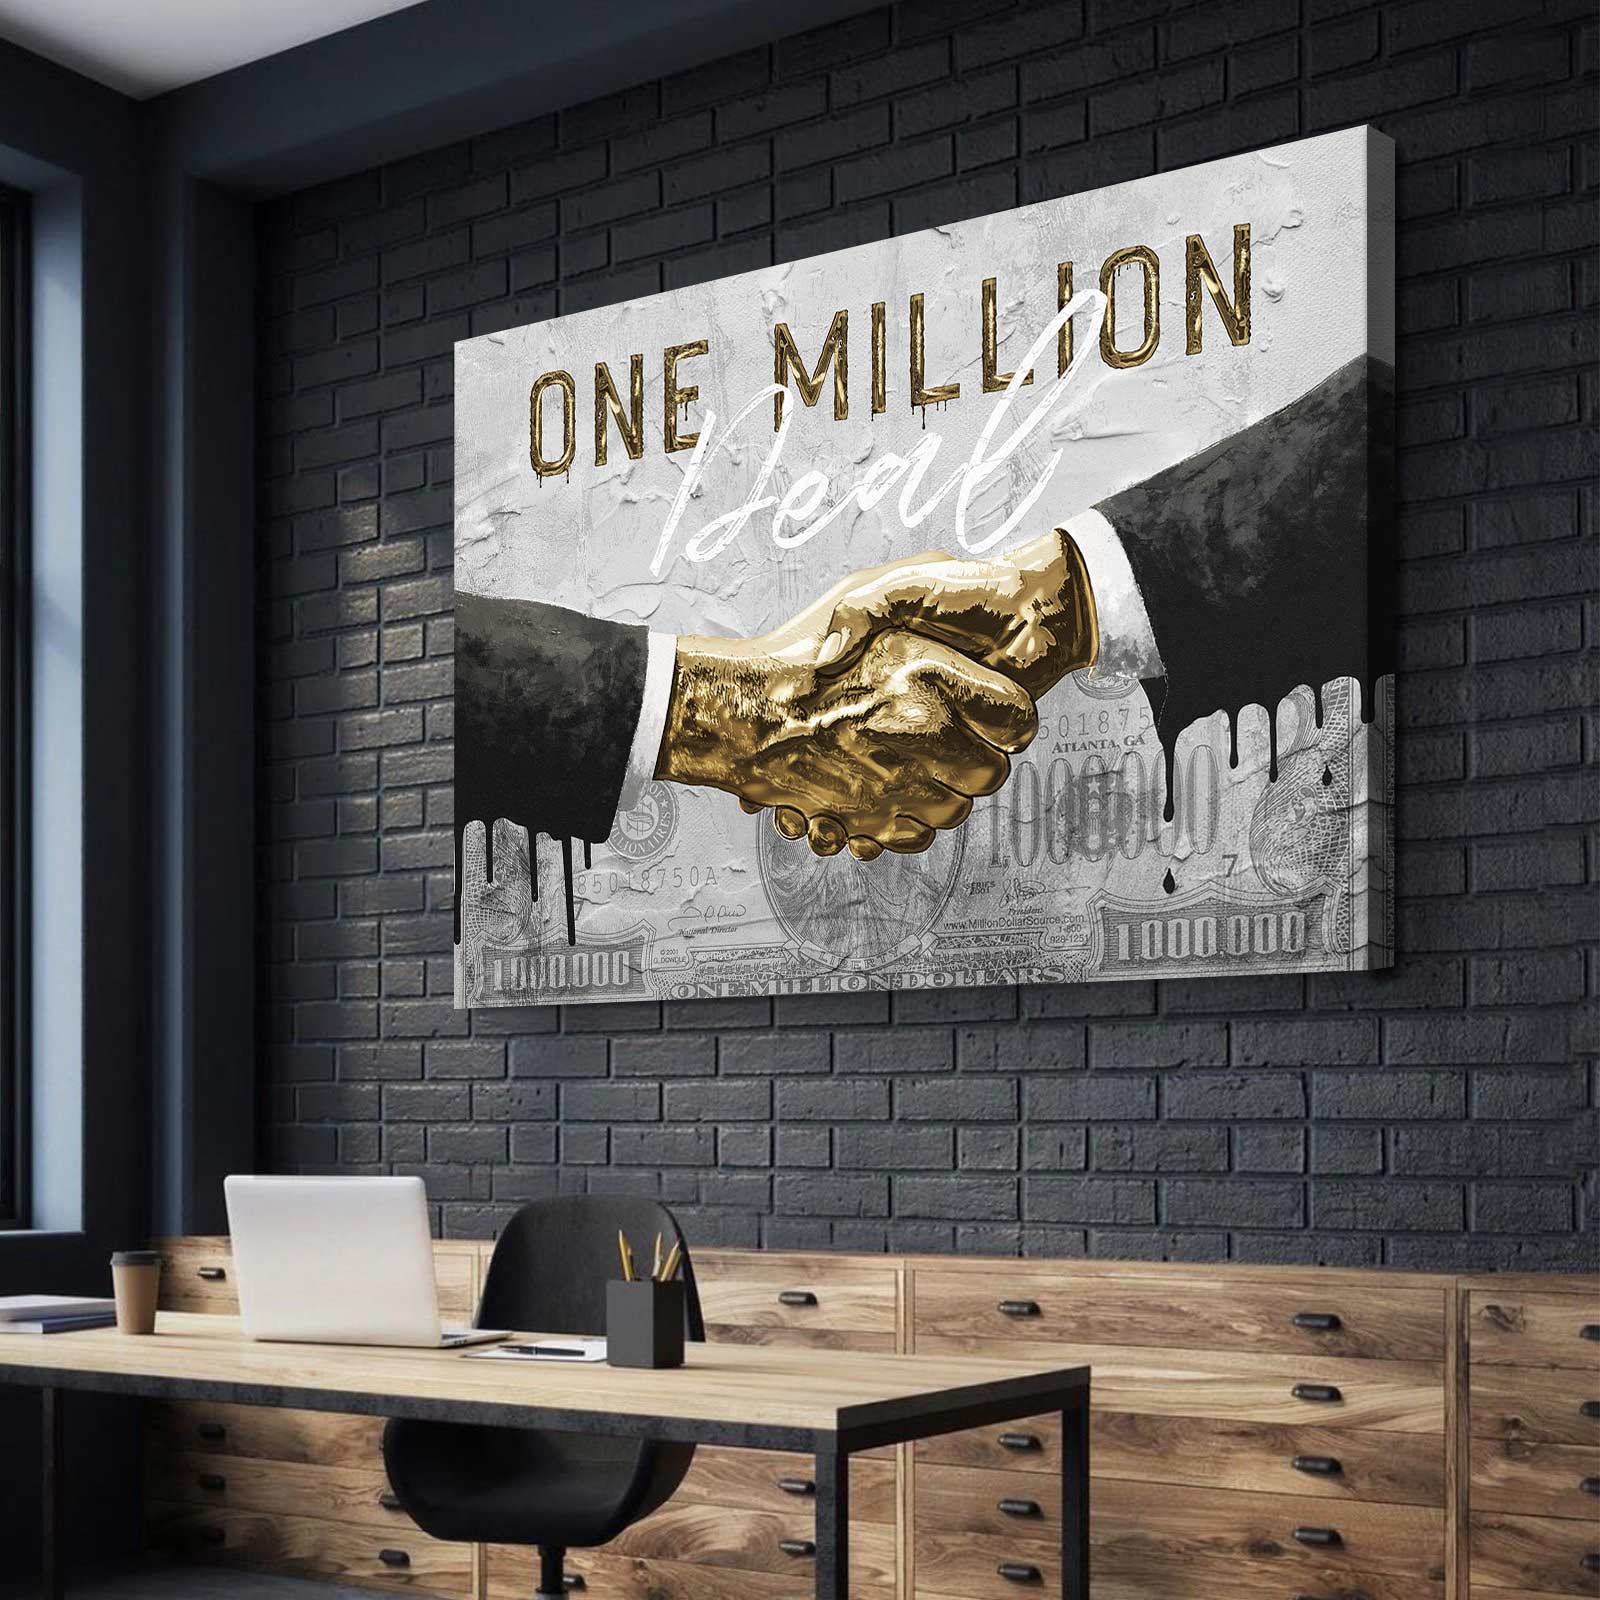 One Million Deal